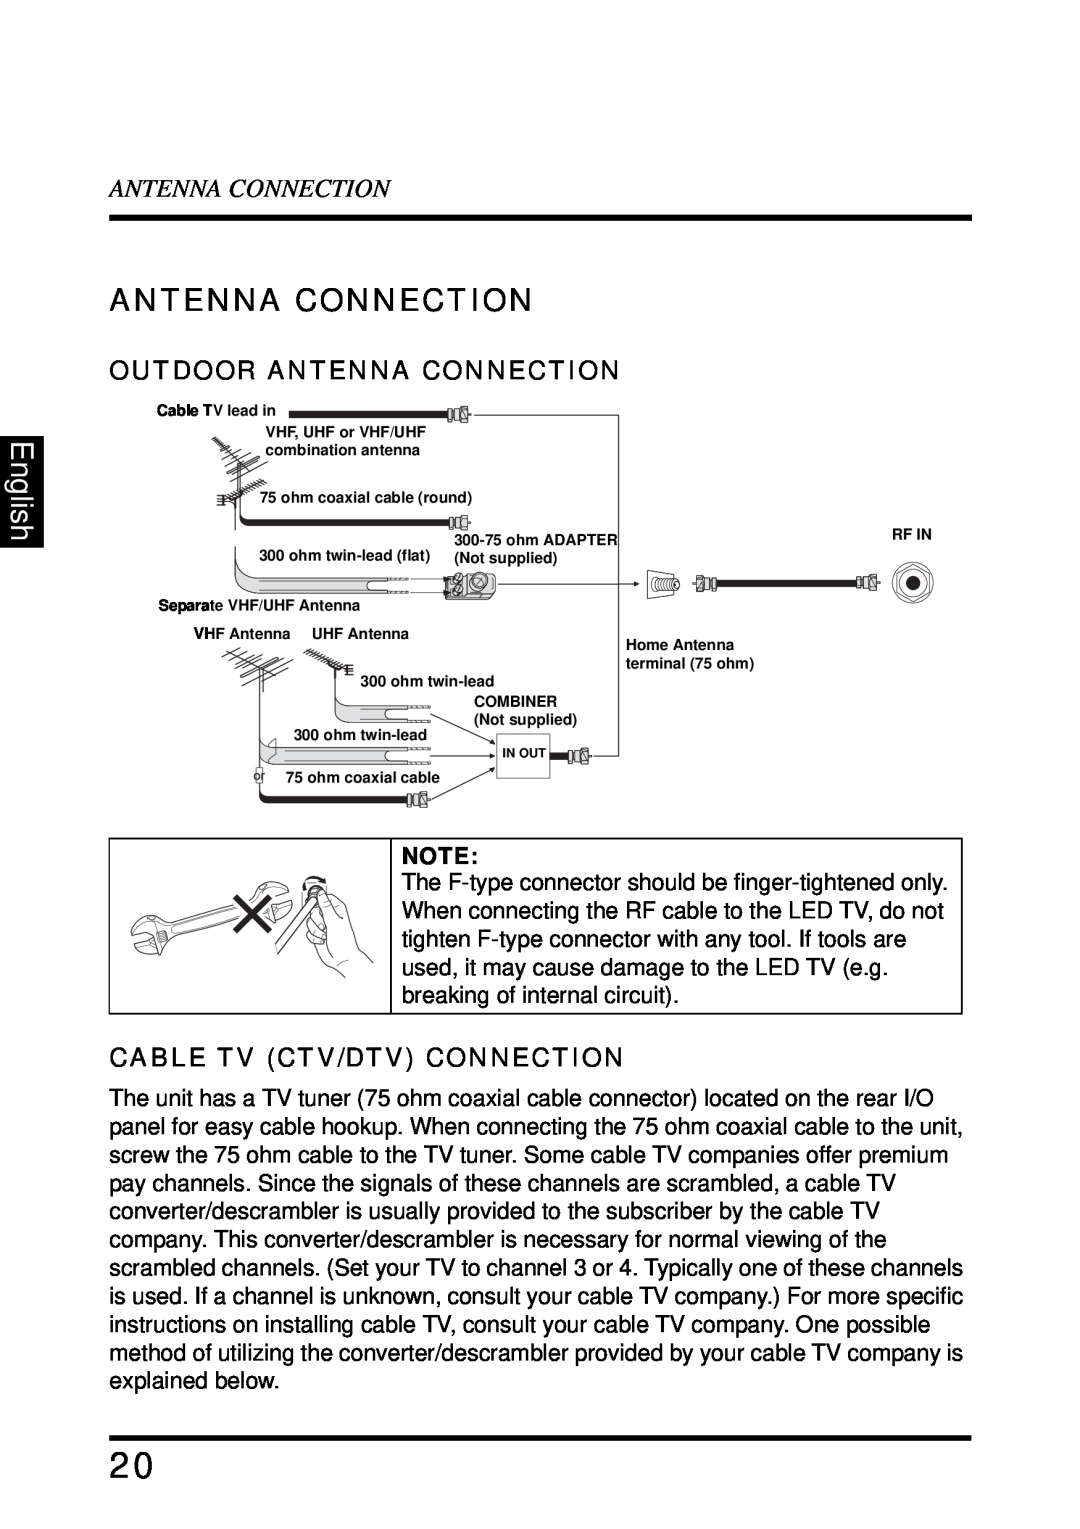 Westinghouse LD-4680 user manual English, Outdoor Antenna Connection, Cable Tv Ctv/Dtv Connection 